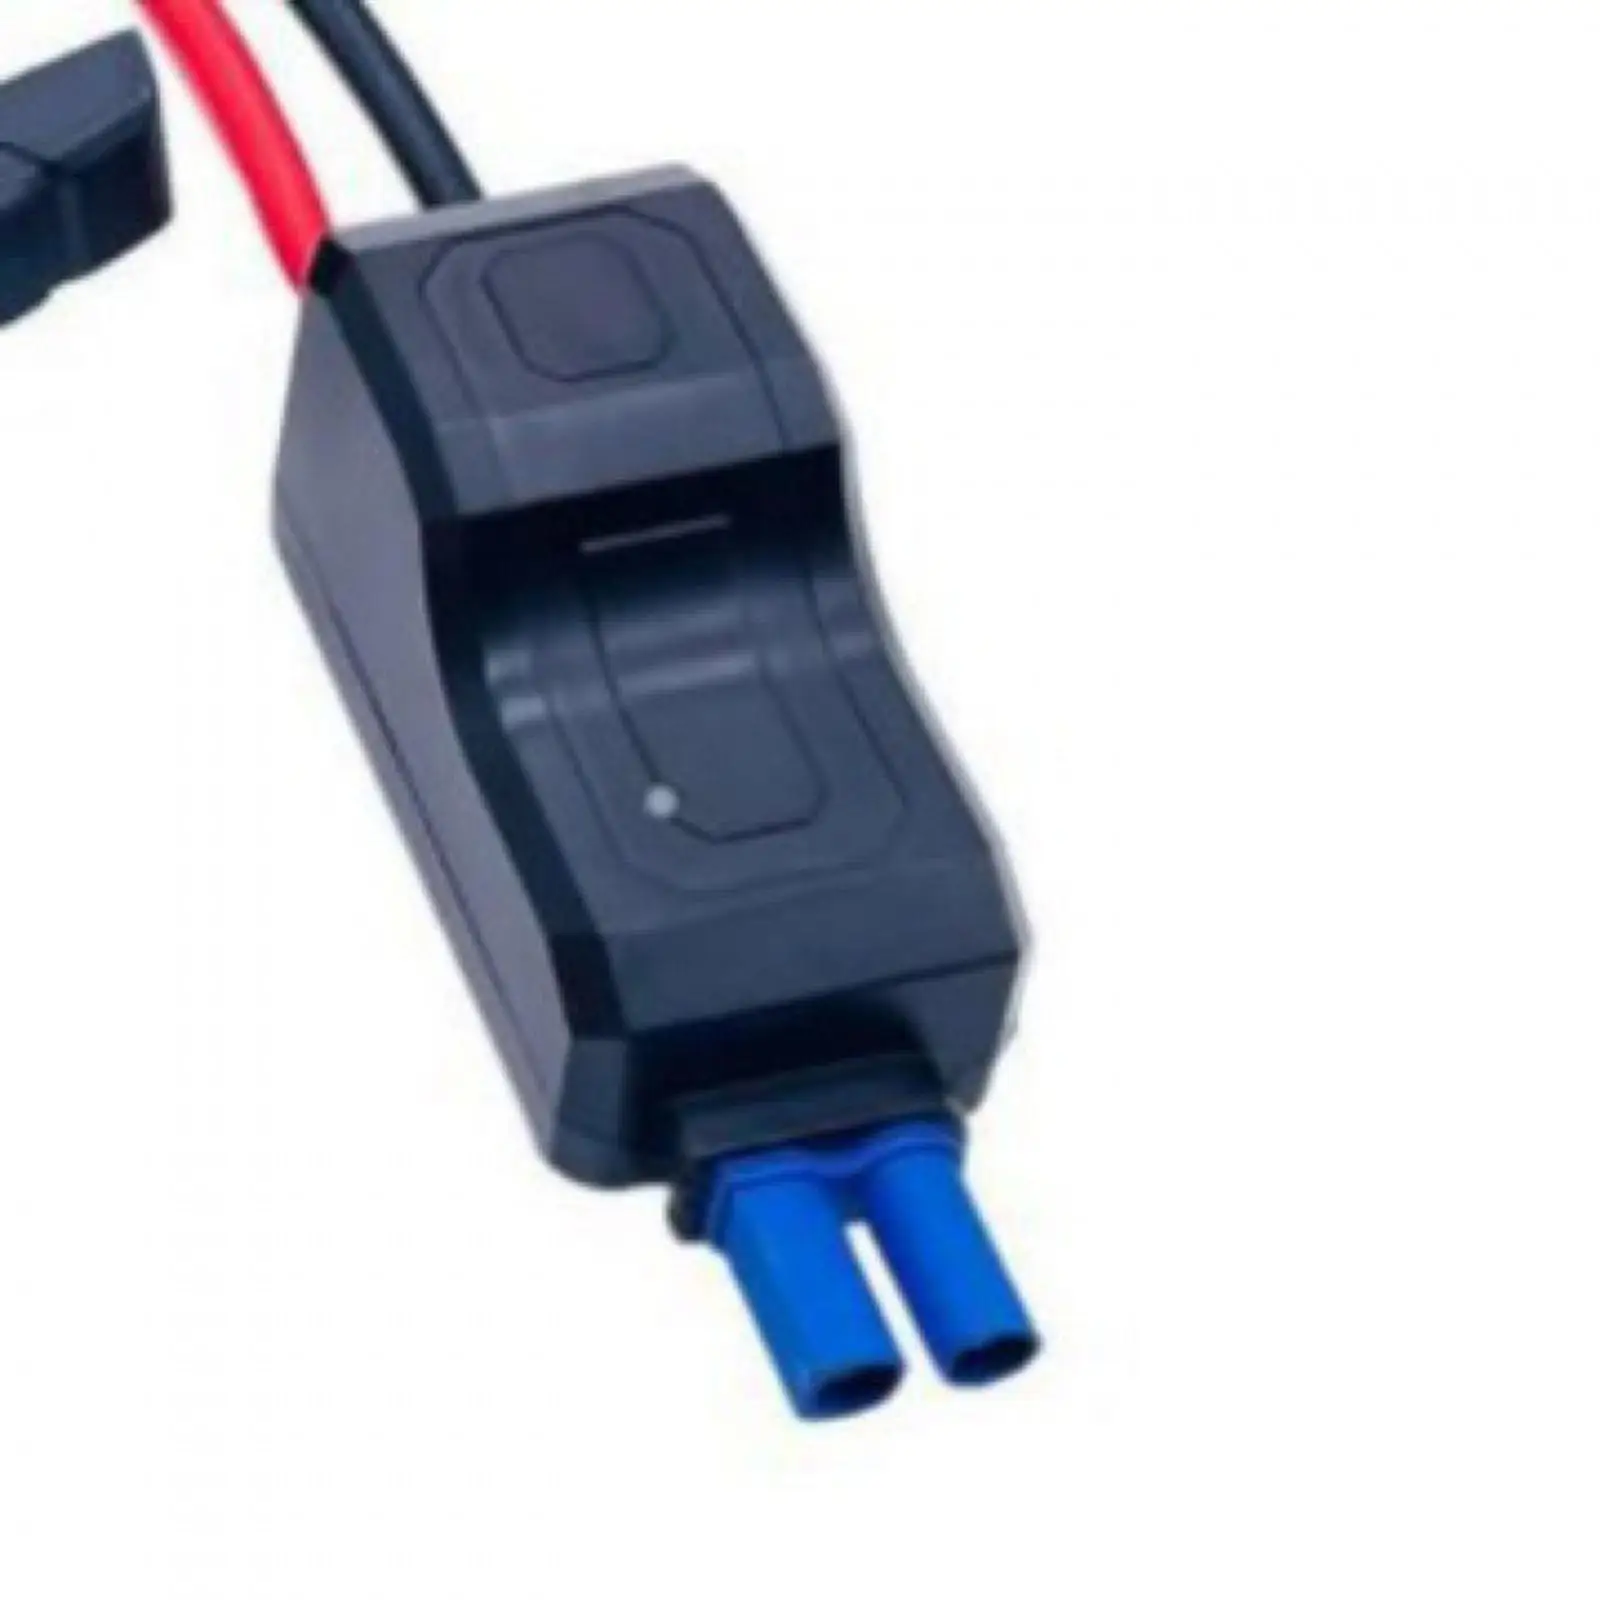 Generic Jump Starter Cable Alligator Clip Professional Battery Accessories